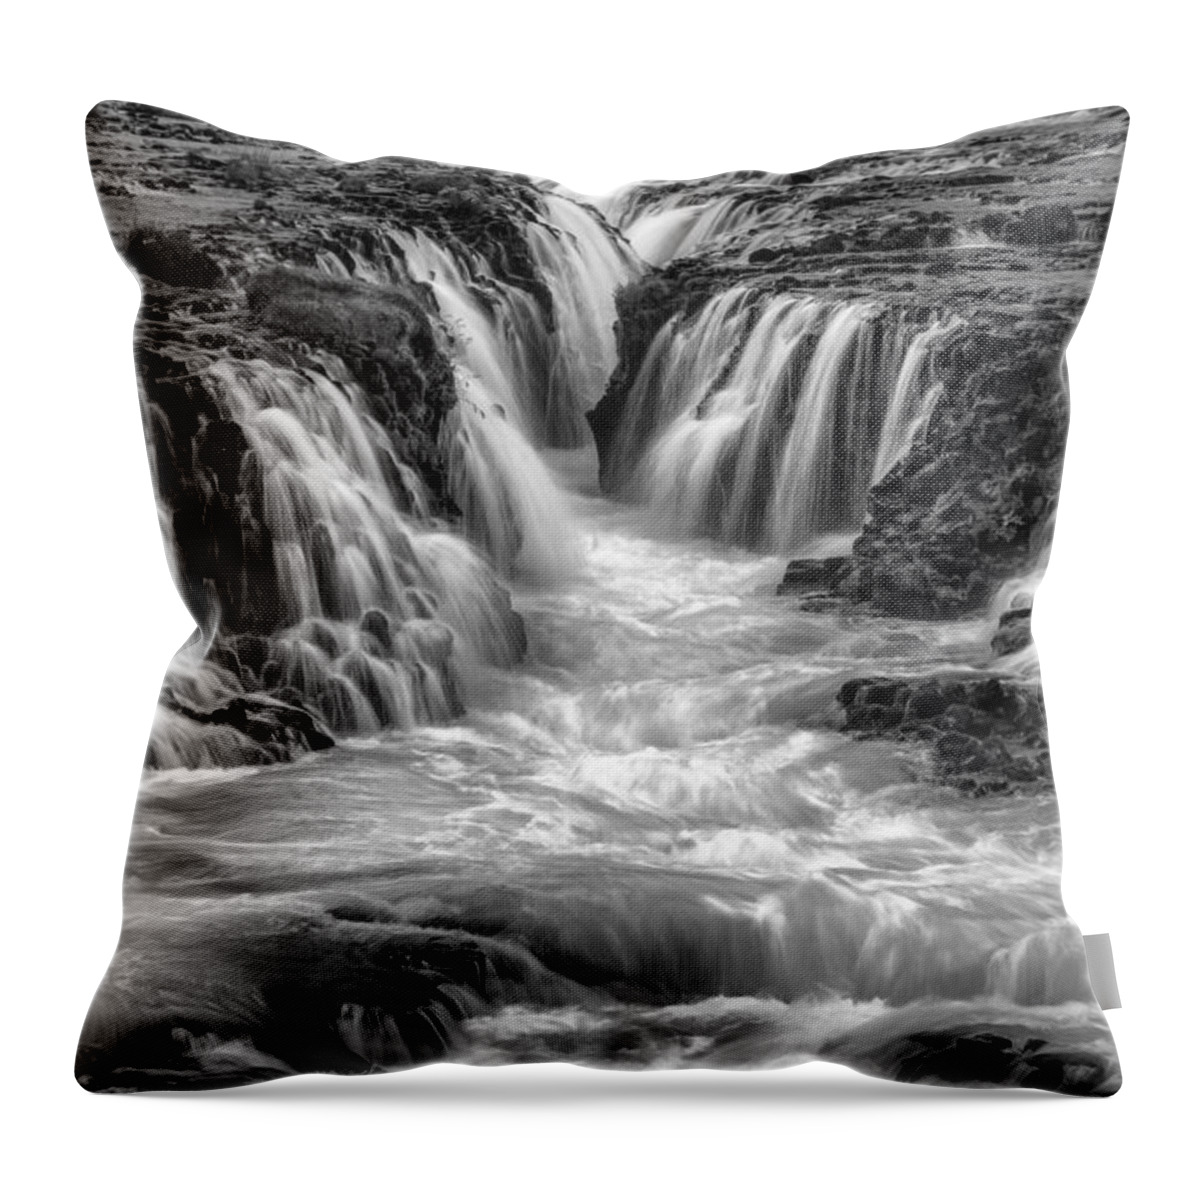 Horizontal Throw Pillow featuring the photograph Canyon Waters II by Jon Glaser